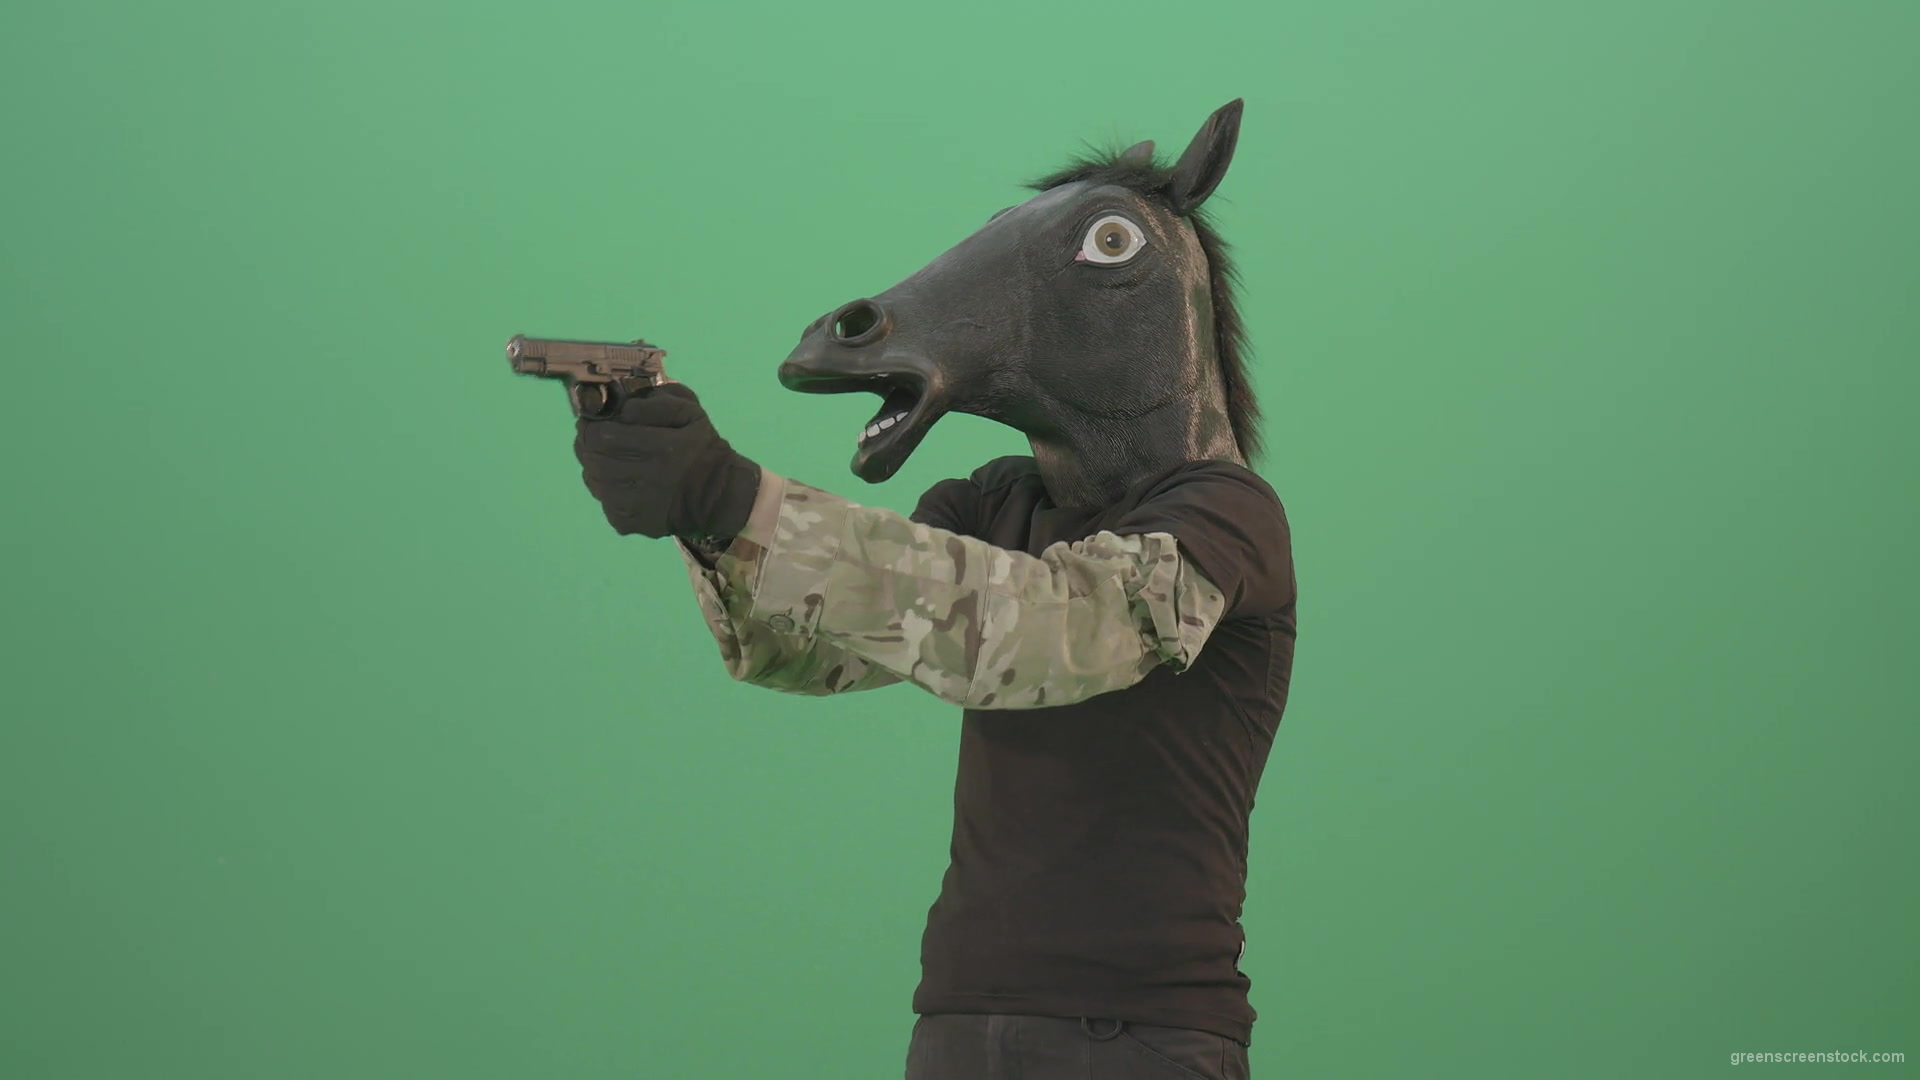 Funny-Horse-Man-in-Mask-shooting-enemies-isolated-on-green-screen-4K-Video-Footage-1920_005 Green Screen Stock